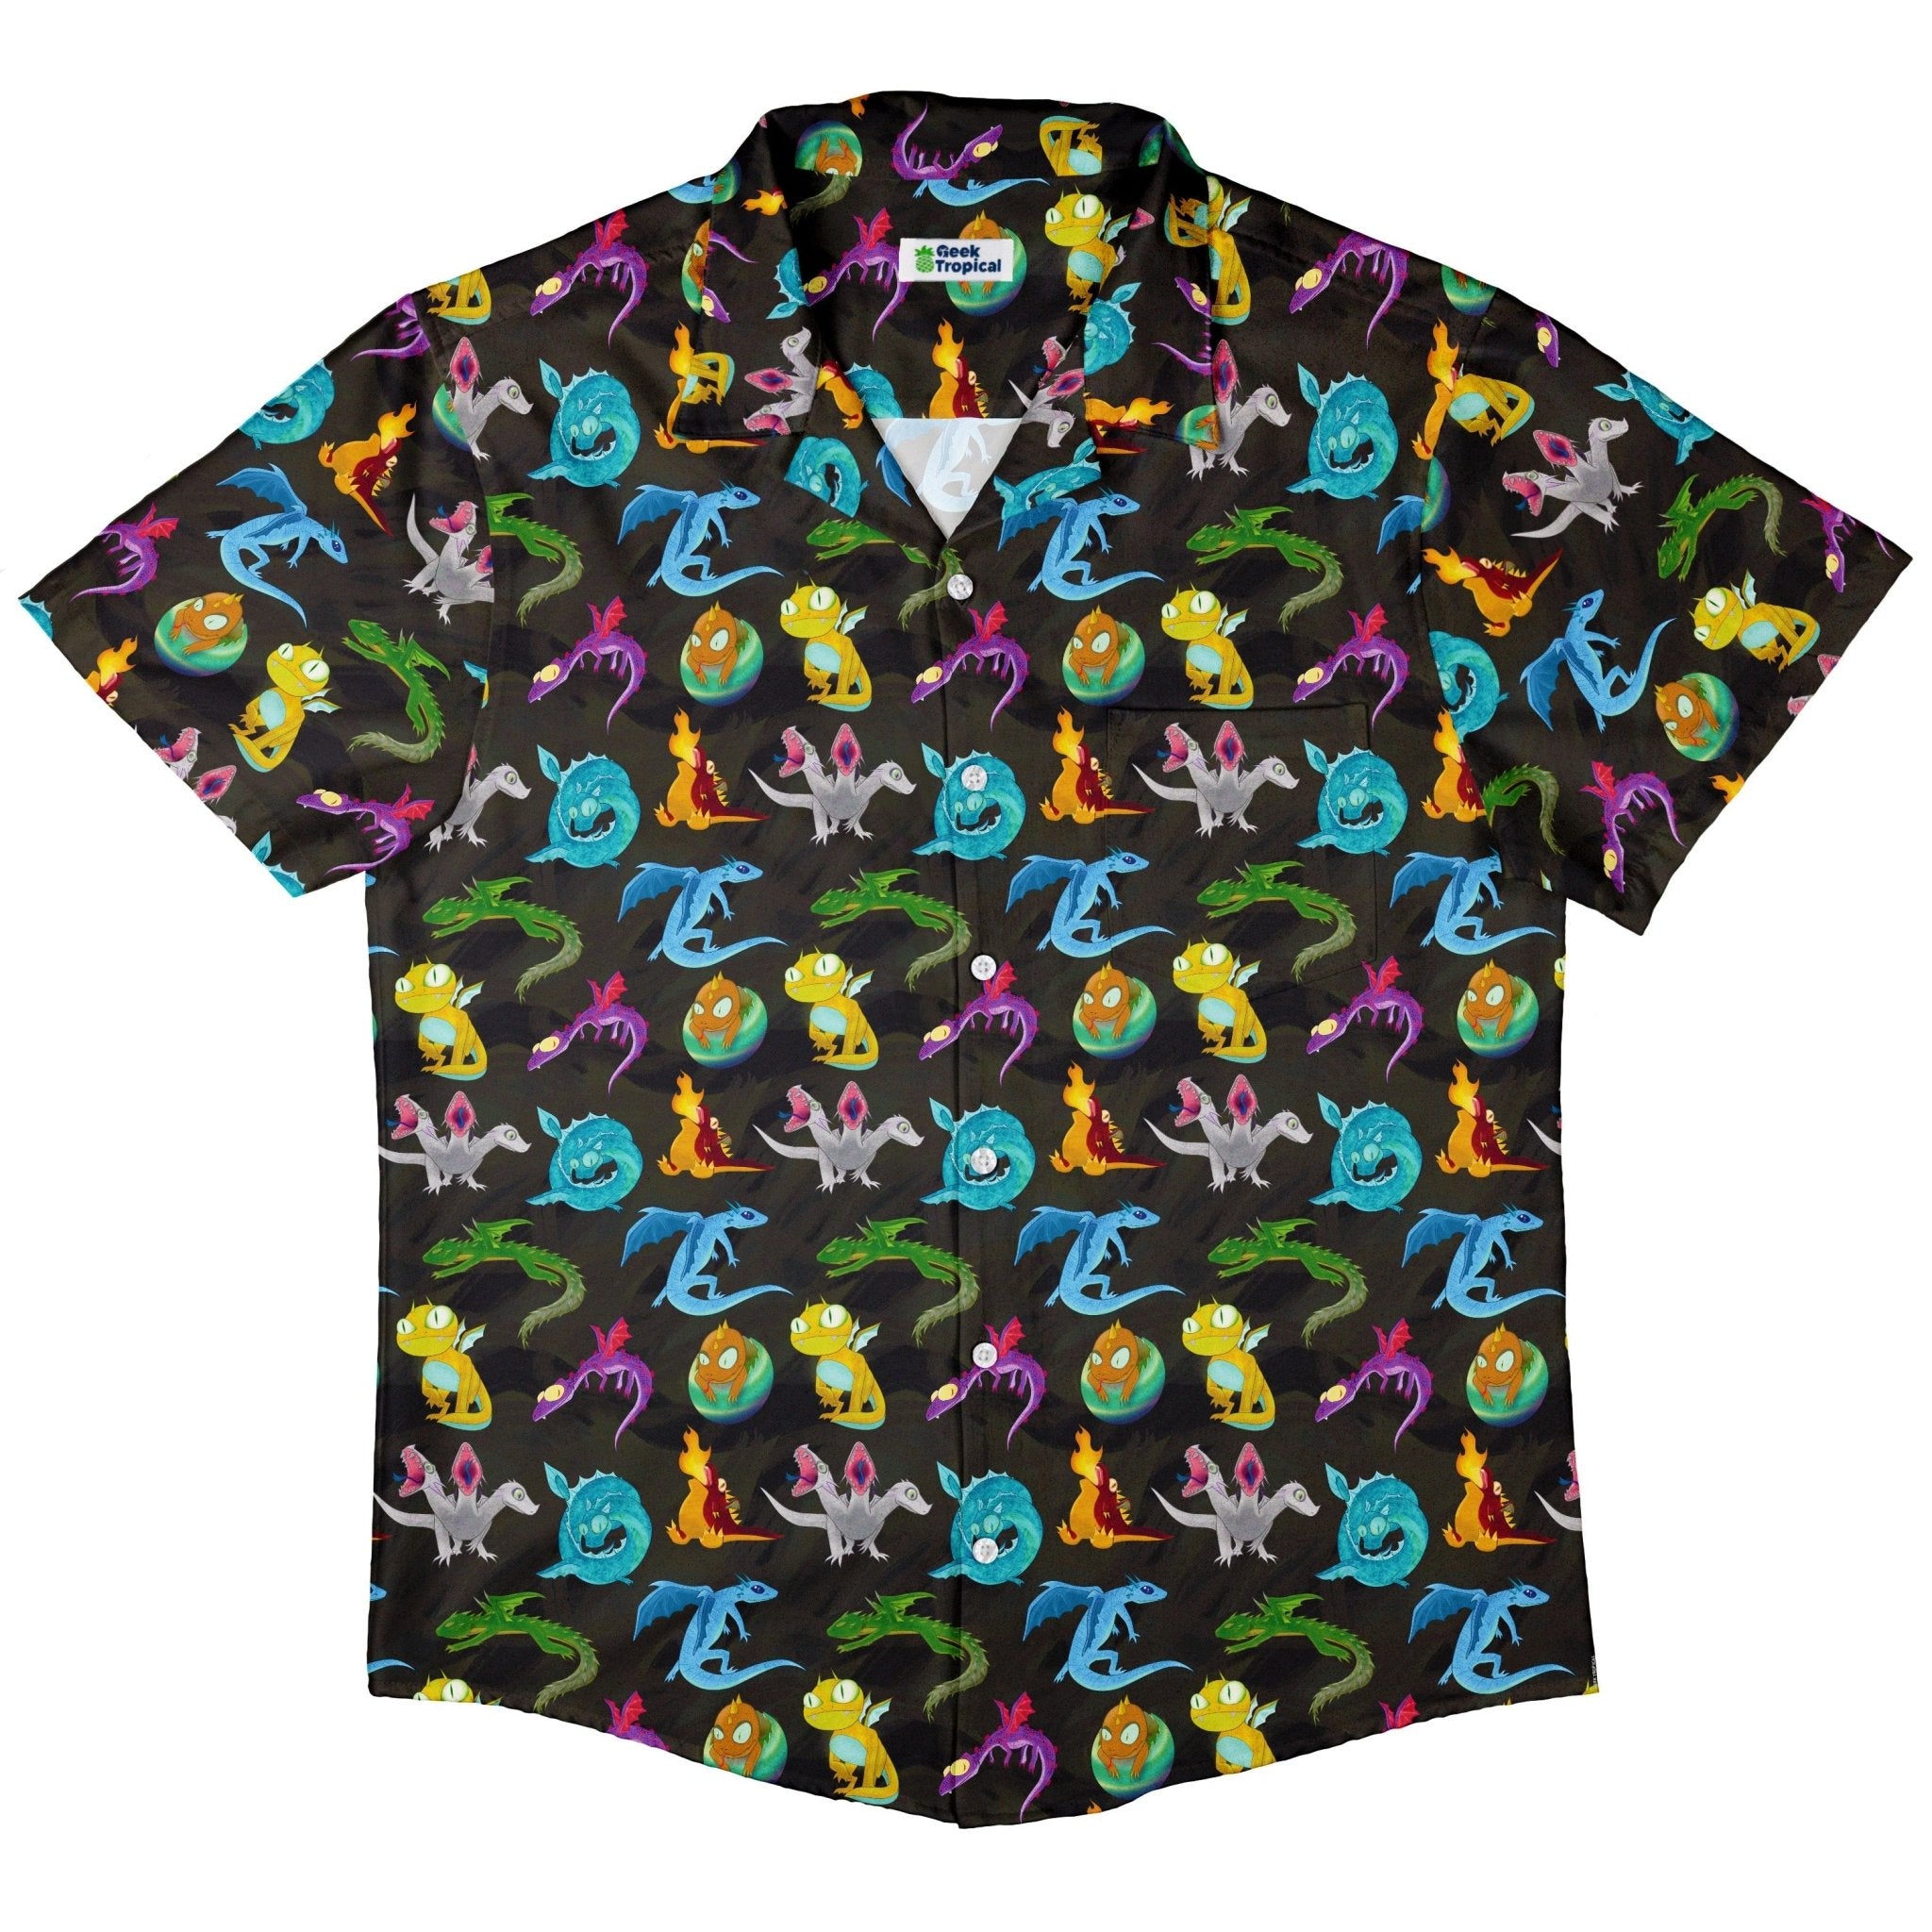 Cute Baby Dragons Button Up Shirt - adult sizing - Animal Patterns - Designs by Nathan